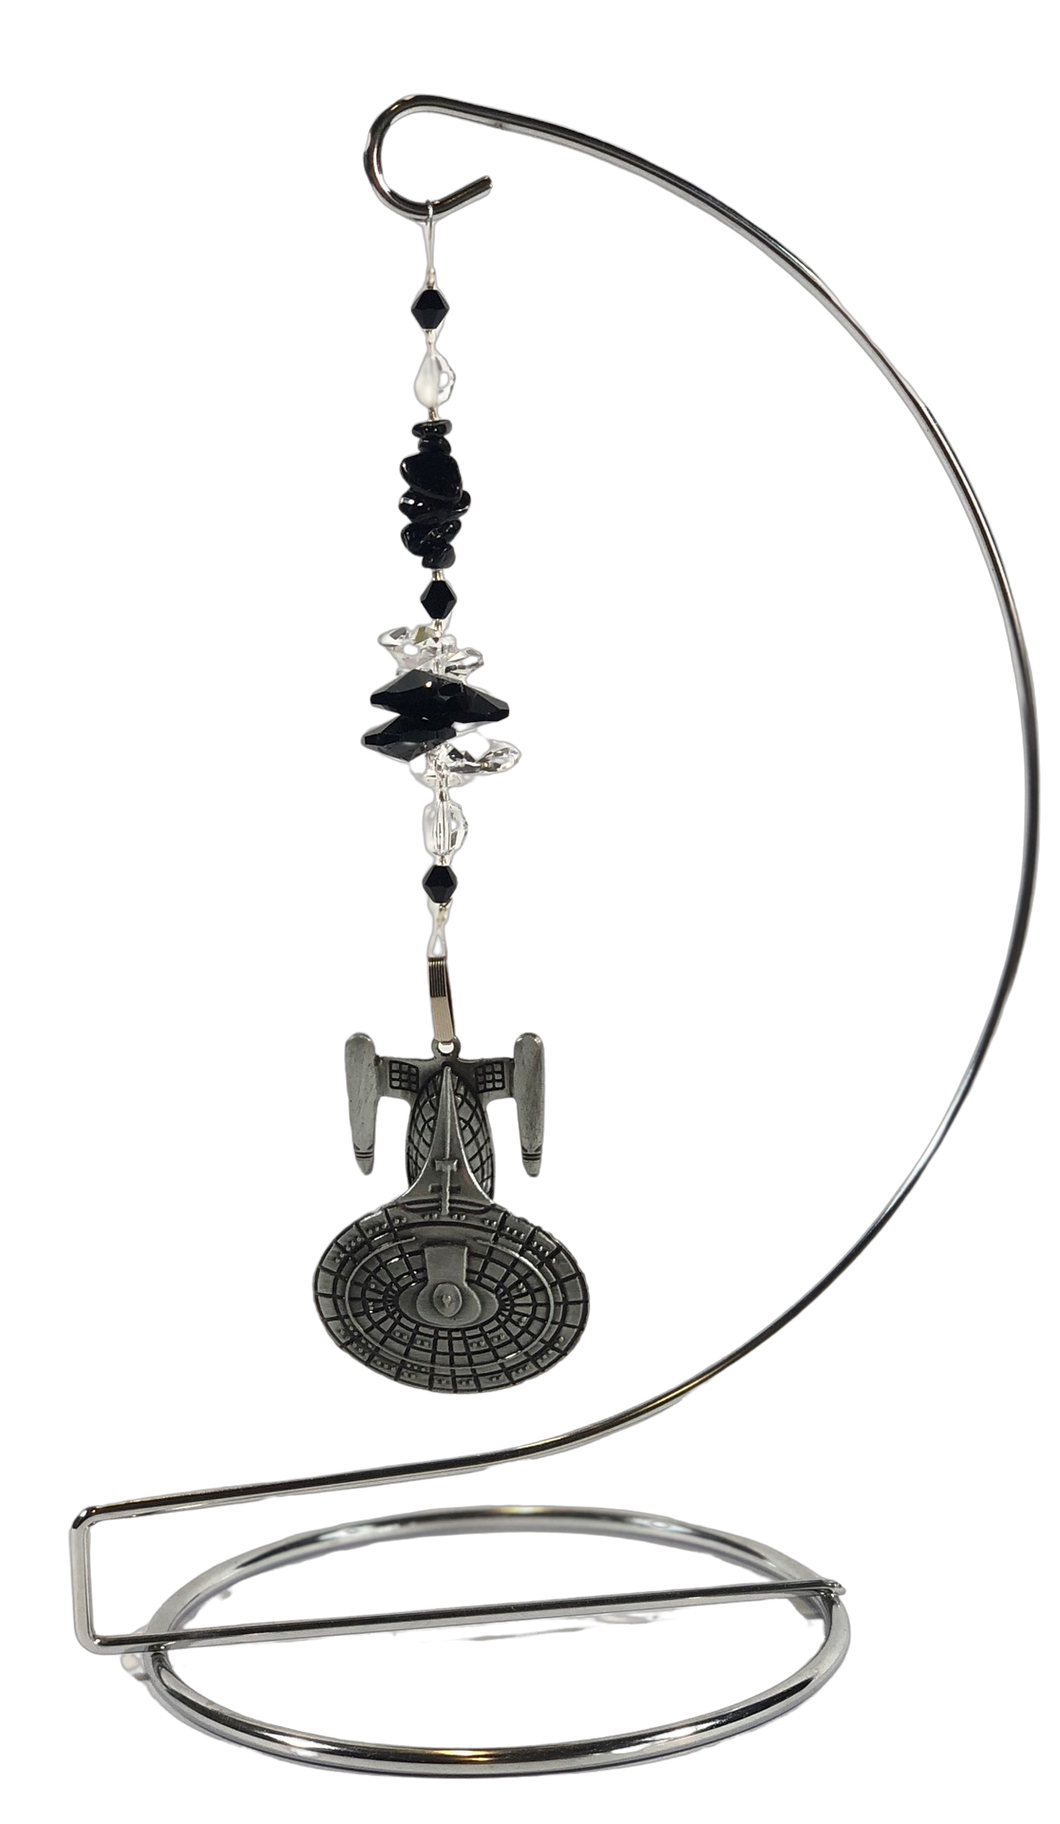 Star Trek - Enterprise crystal suncatcher is decorated with snowflake obsidian gemstones and come on this amazing stand.